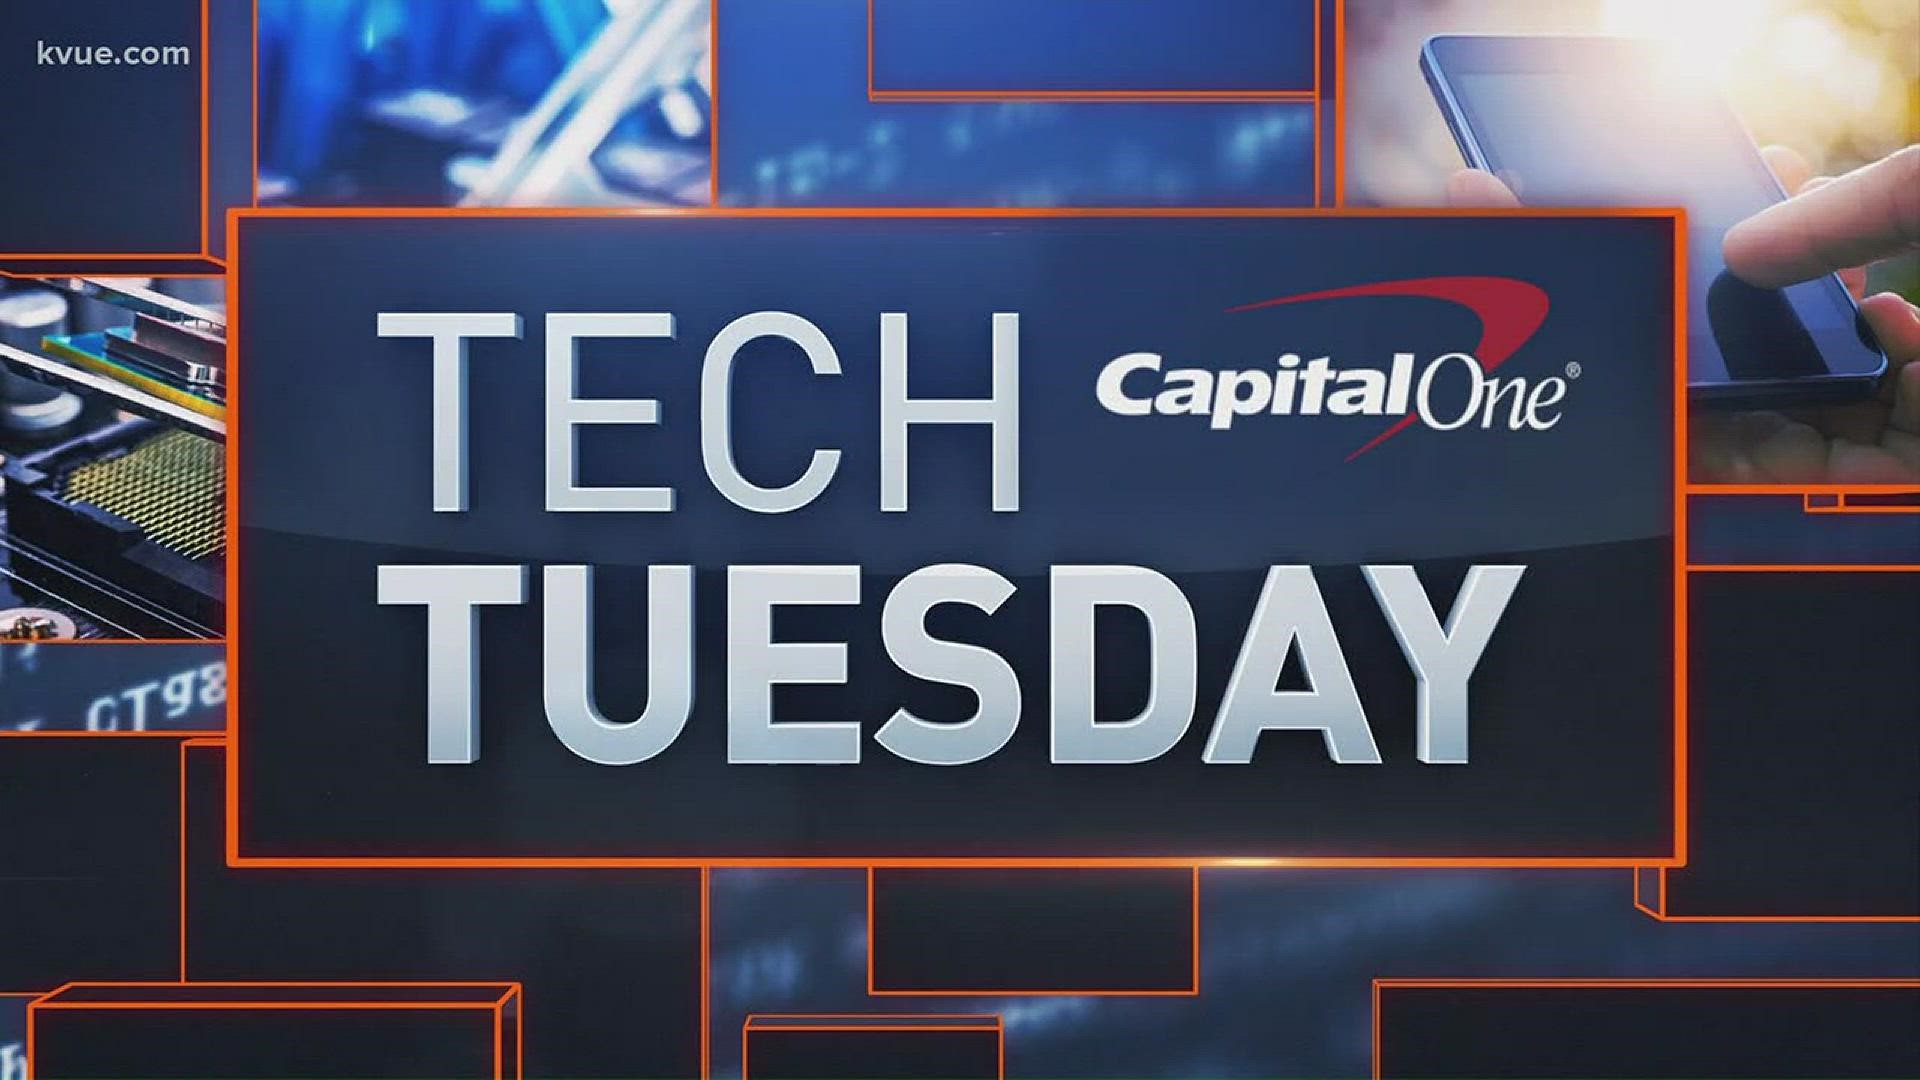 In tonight's Tech Tuesday we're getting a look at the technology that could change the amount of stroke deaths that happen each year.